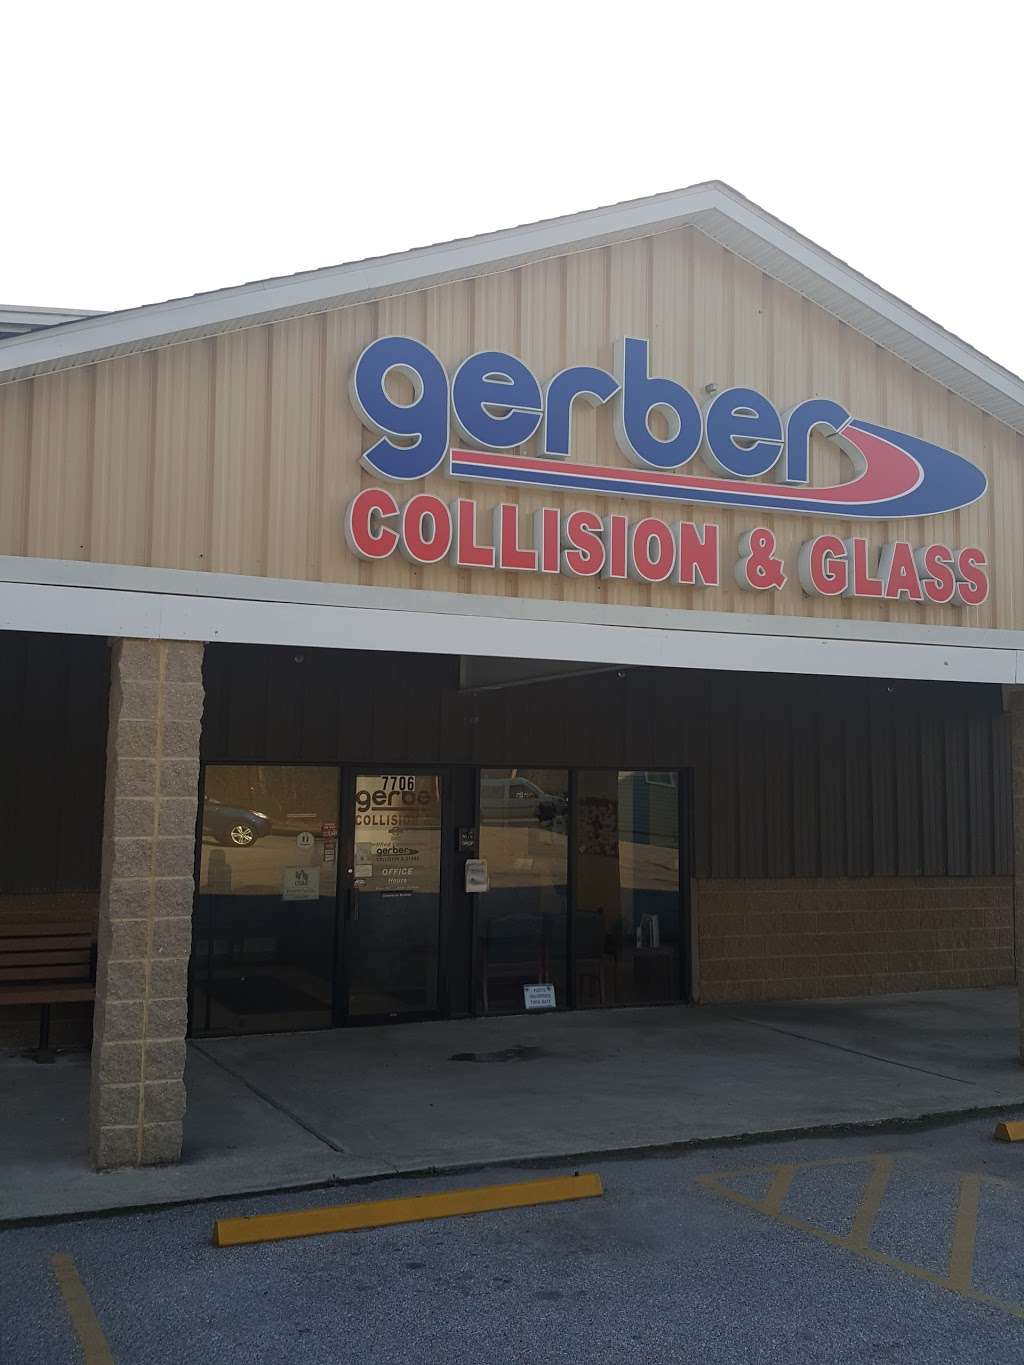 Gerber Collision & Glass | 7706 Race Rd, Jessup, MD 20794 | Phone: (410) 799-5680